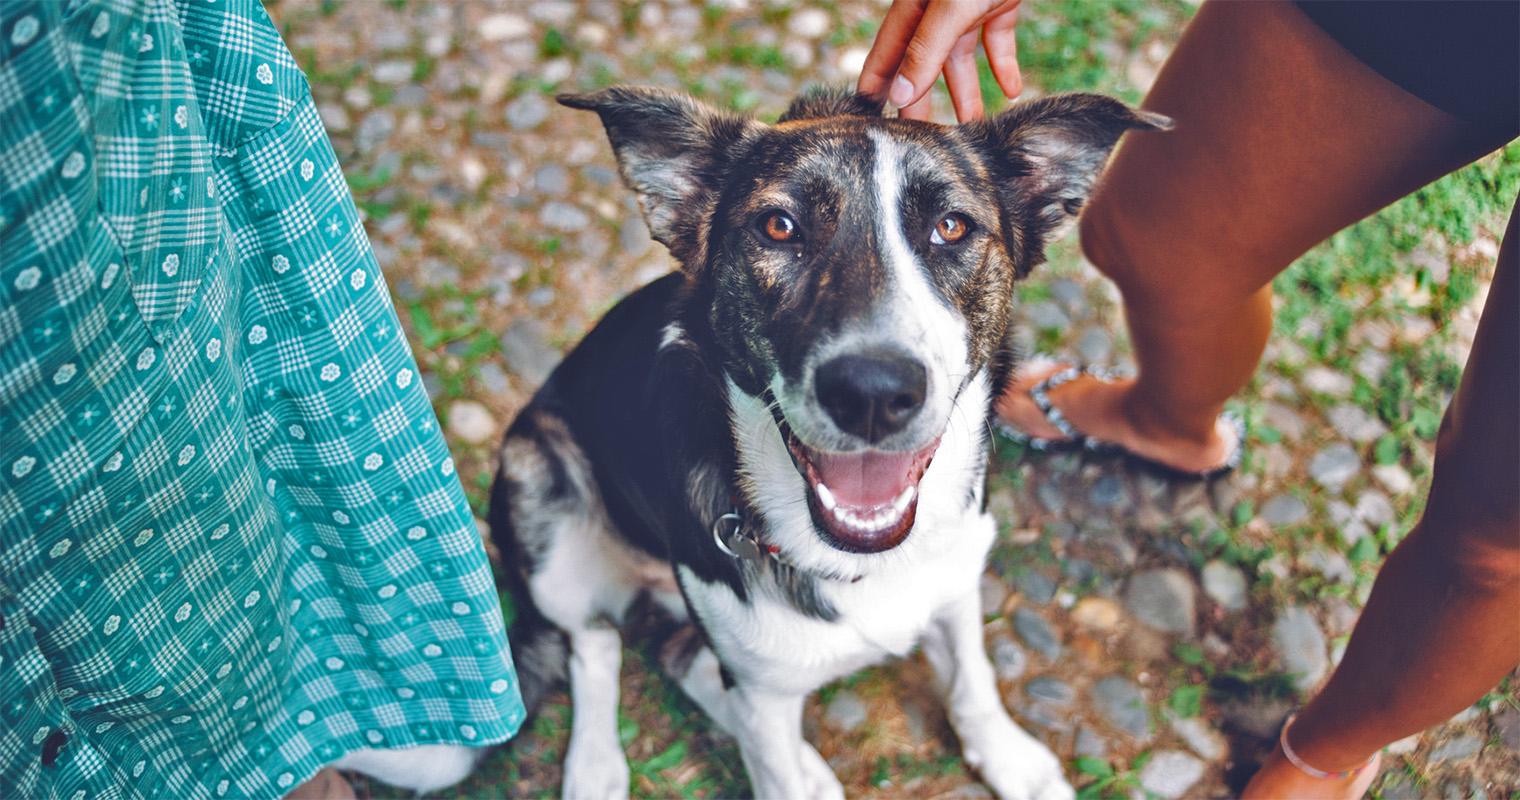 Shelter Dogs: How to Adopt a Dog From a Shelter